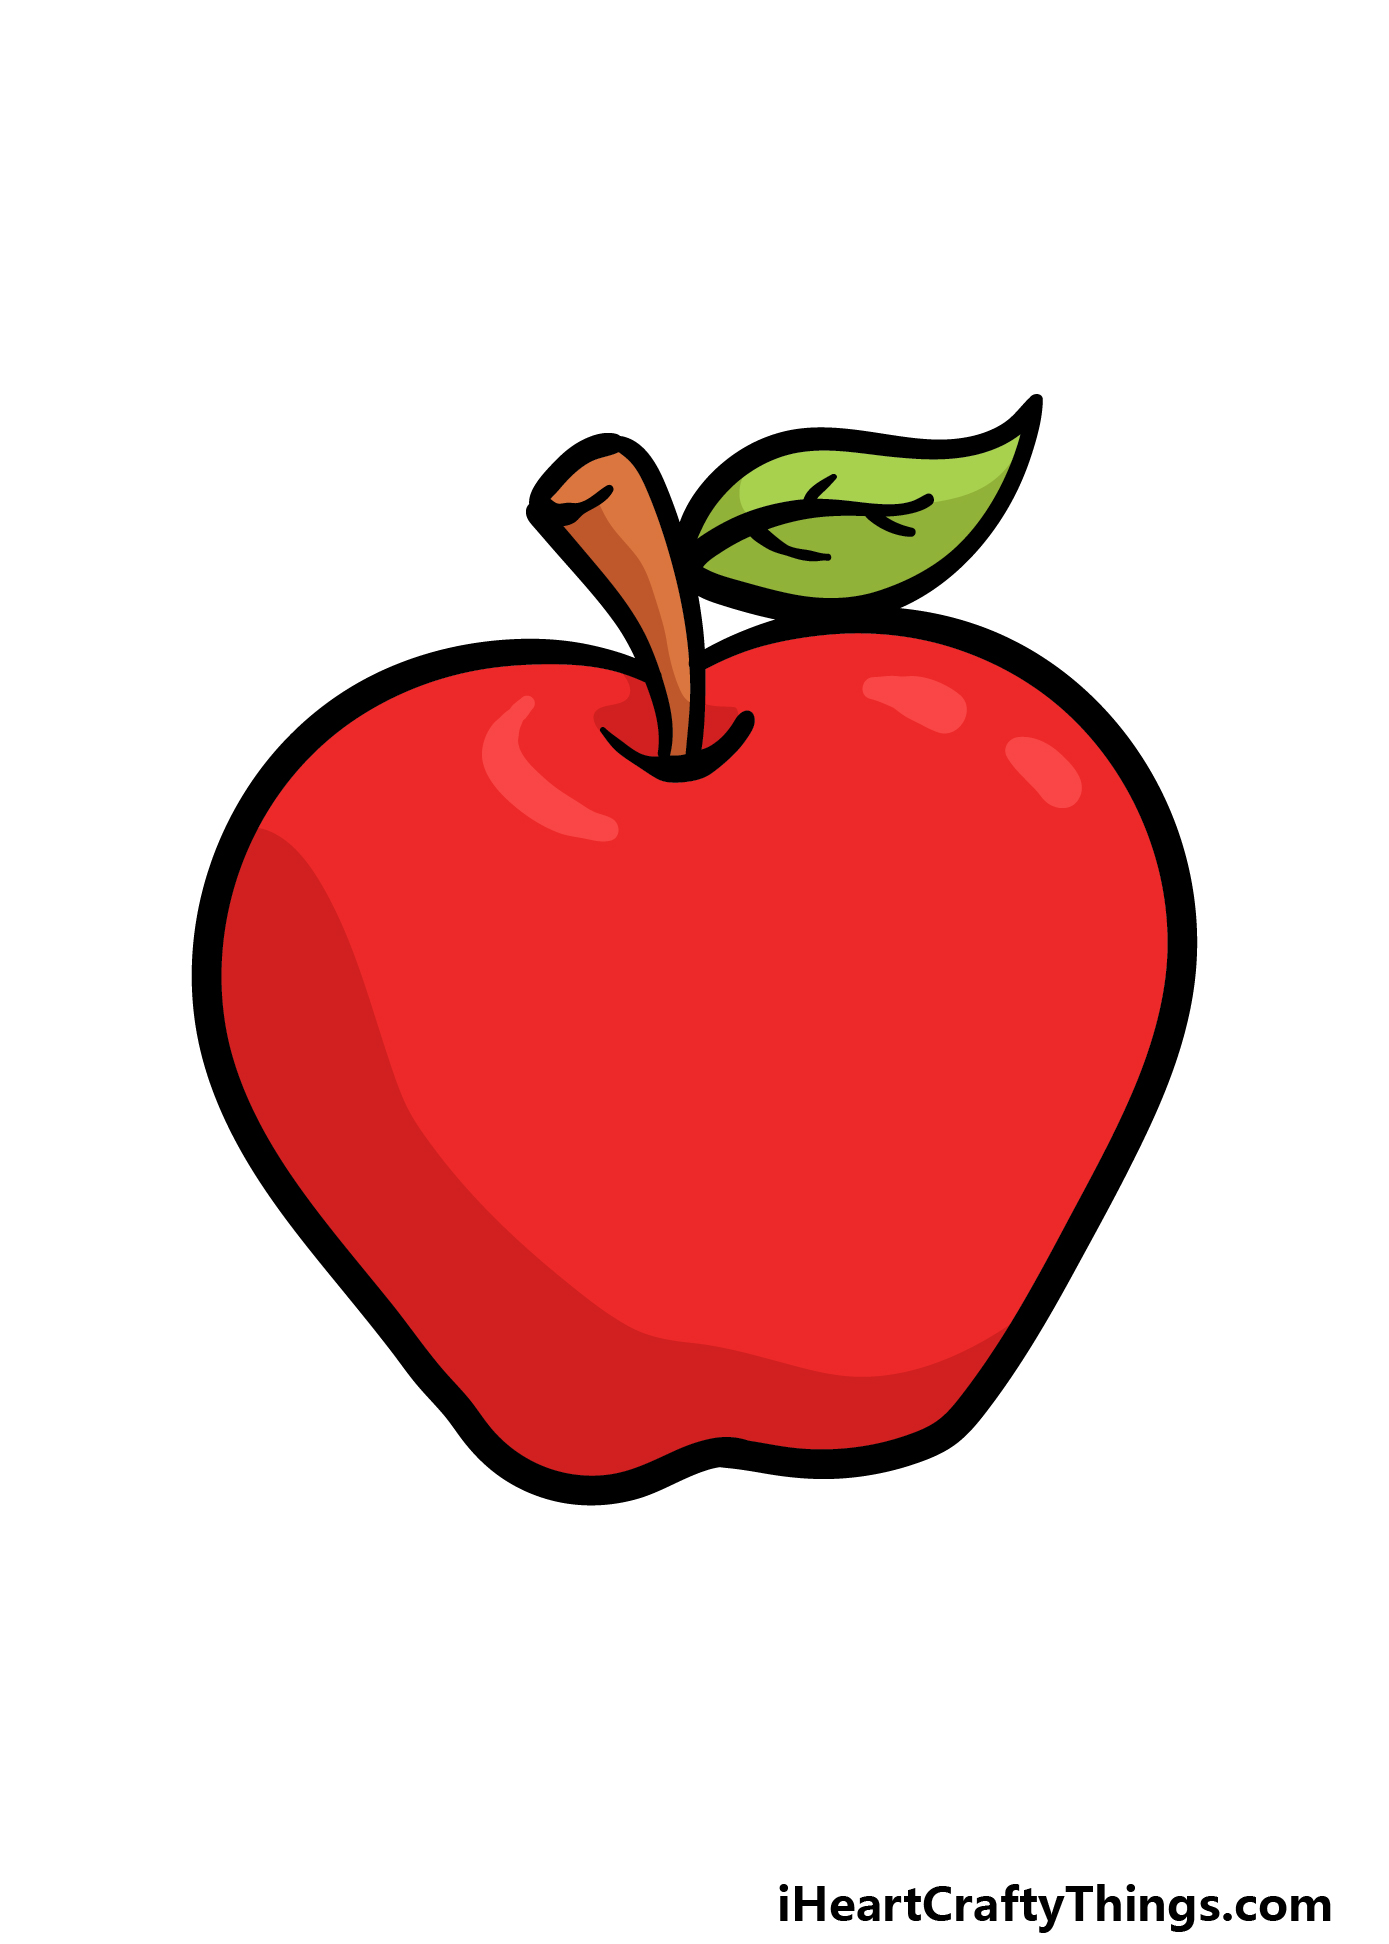 How to Draw an Apple in 8 Easy Steps (for Kids) - VerbNow